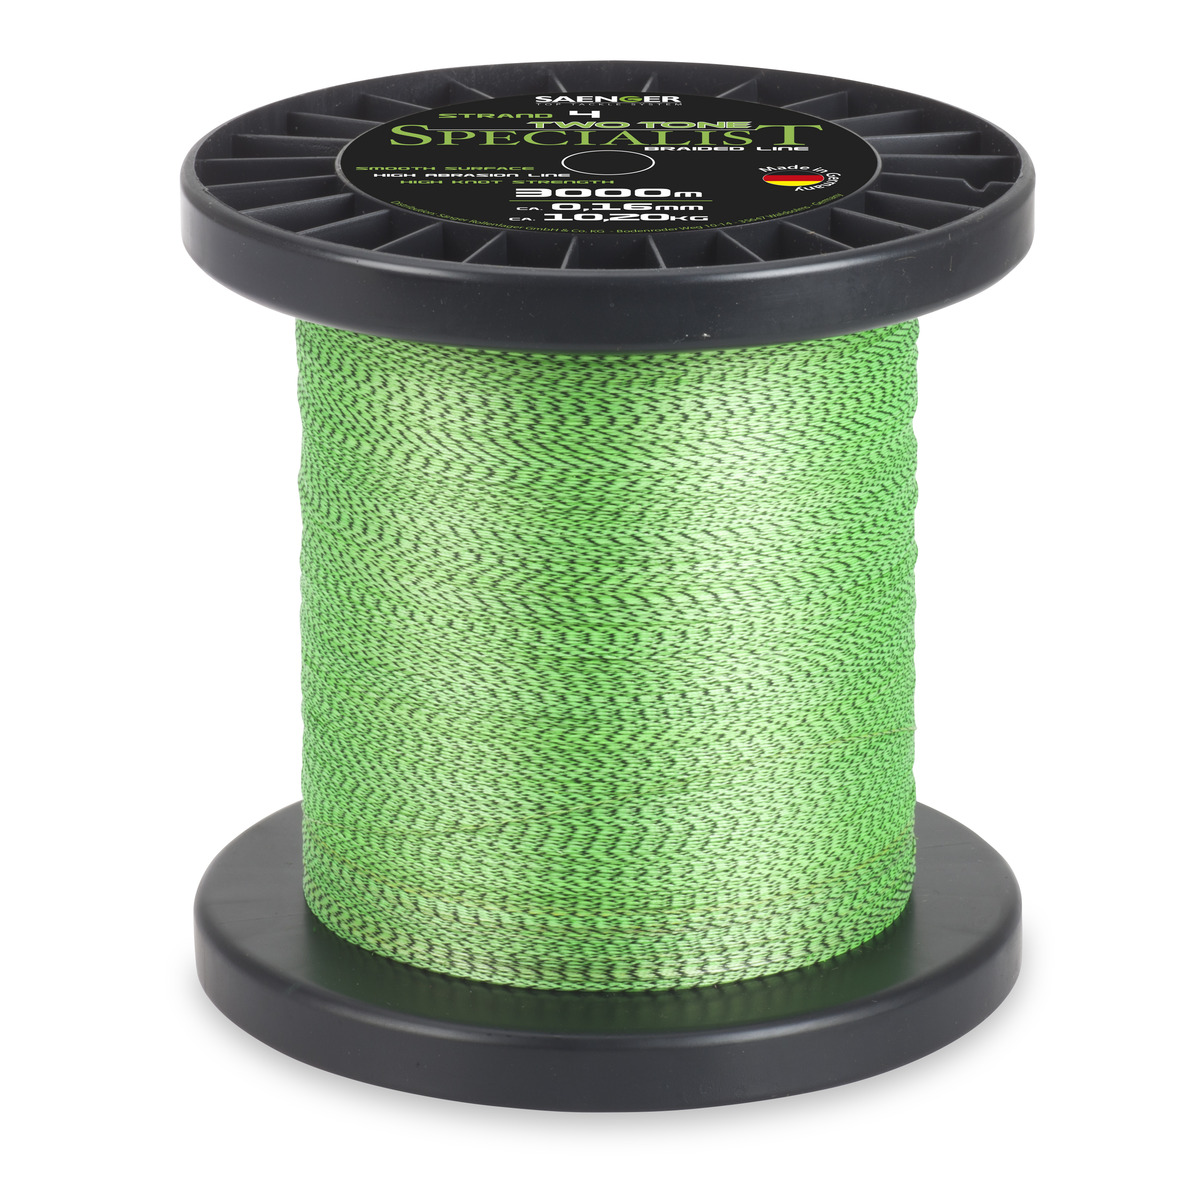 Saenger Specialist Two Tone Fluo Braid - 0,60 mm - 57,9 kg 3000 m